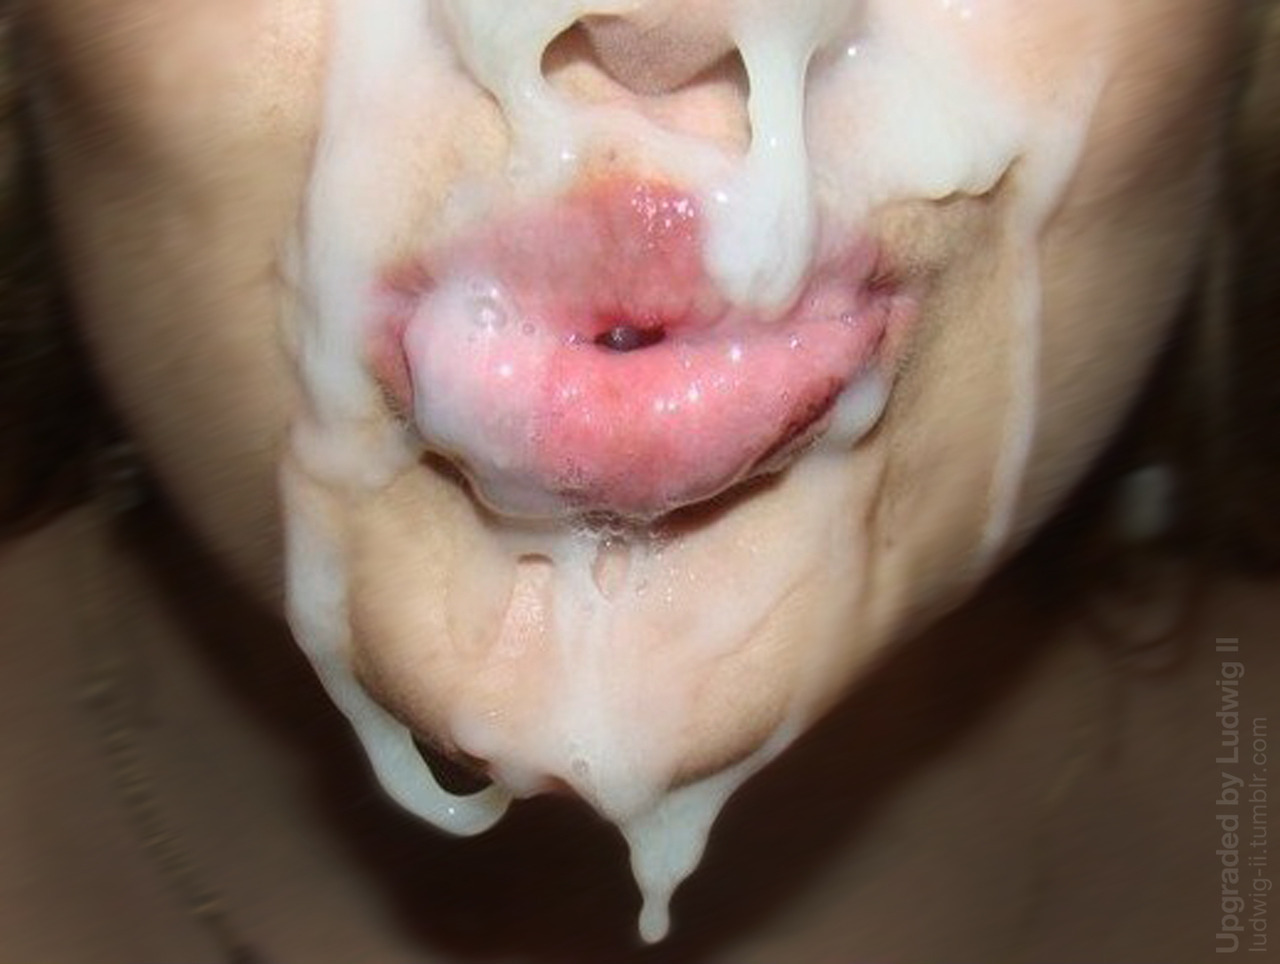 lots of cum in her mouth